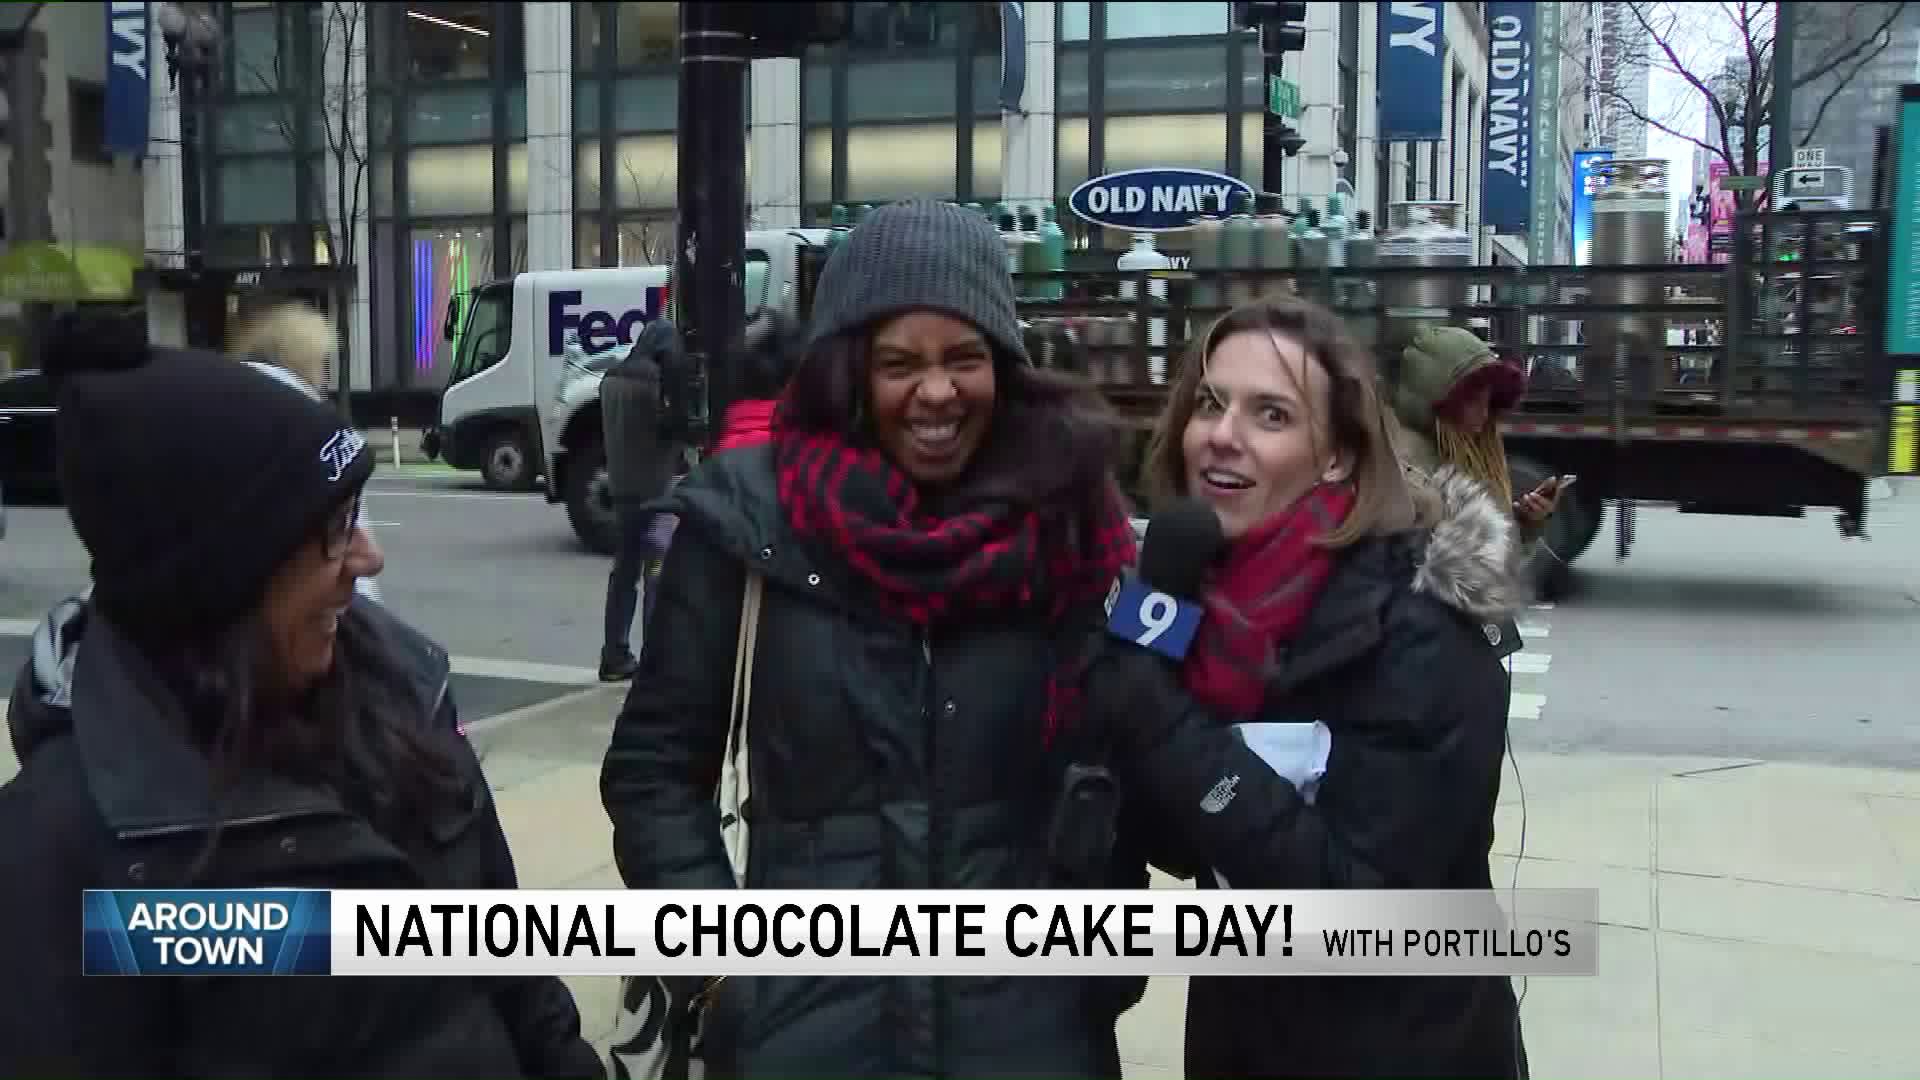 Around Town hands out Portillo’s chocolate cake for National Chocolate Cake Day